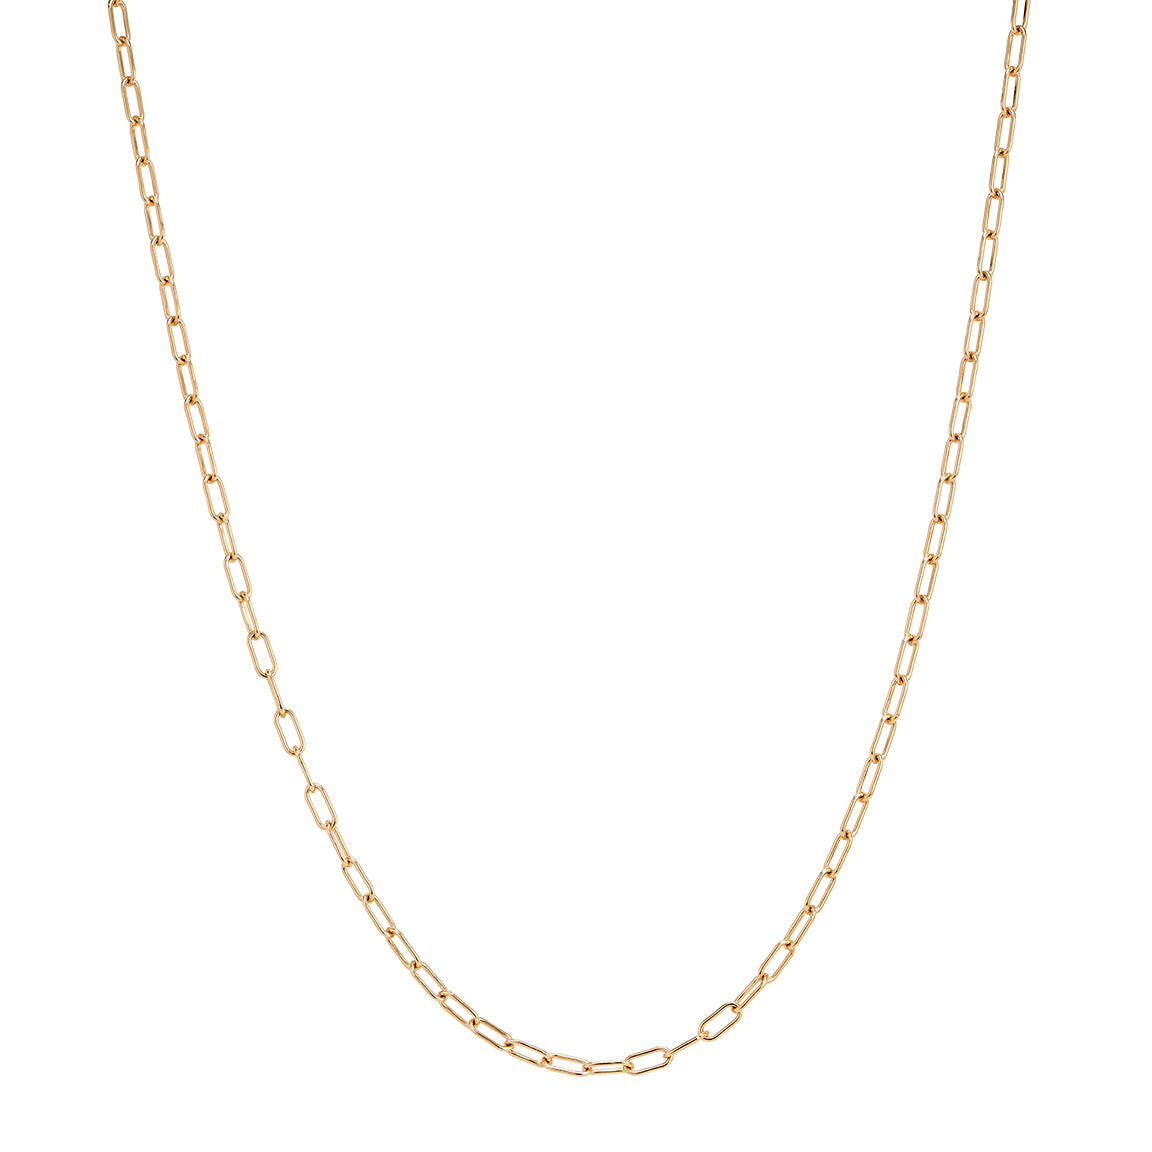 Gold 30" Oval Link Chain